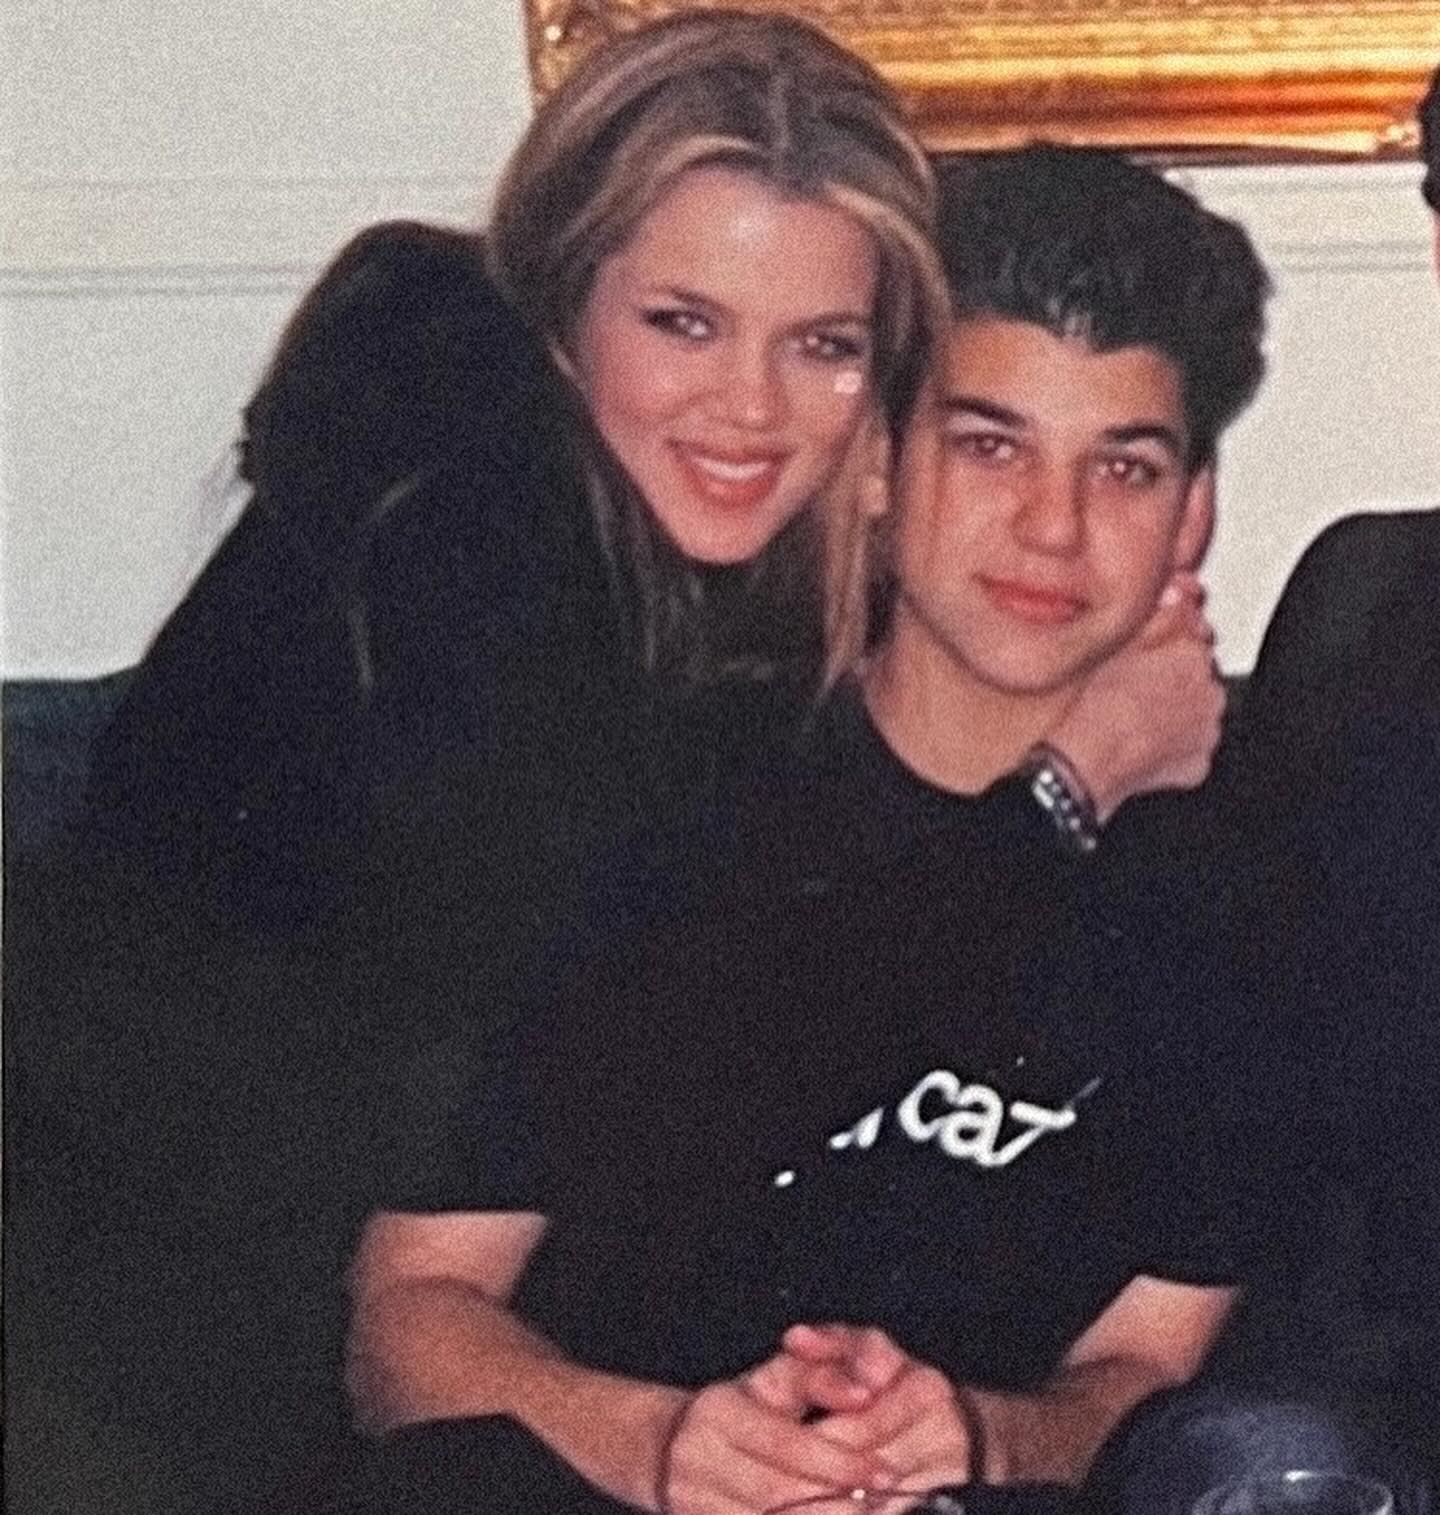 Khloe wrapped her arms around Rob in one of her throwback photos